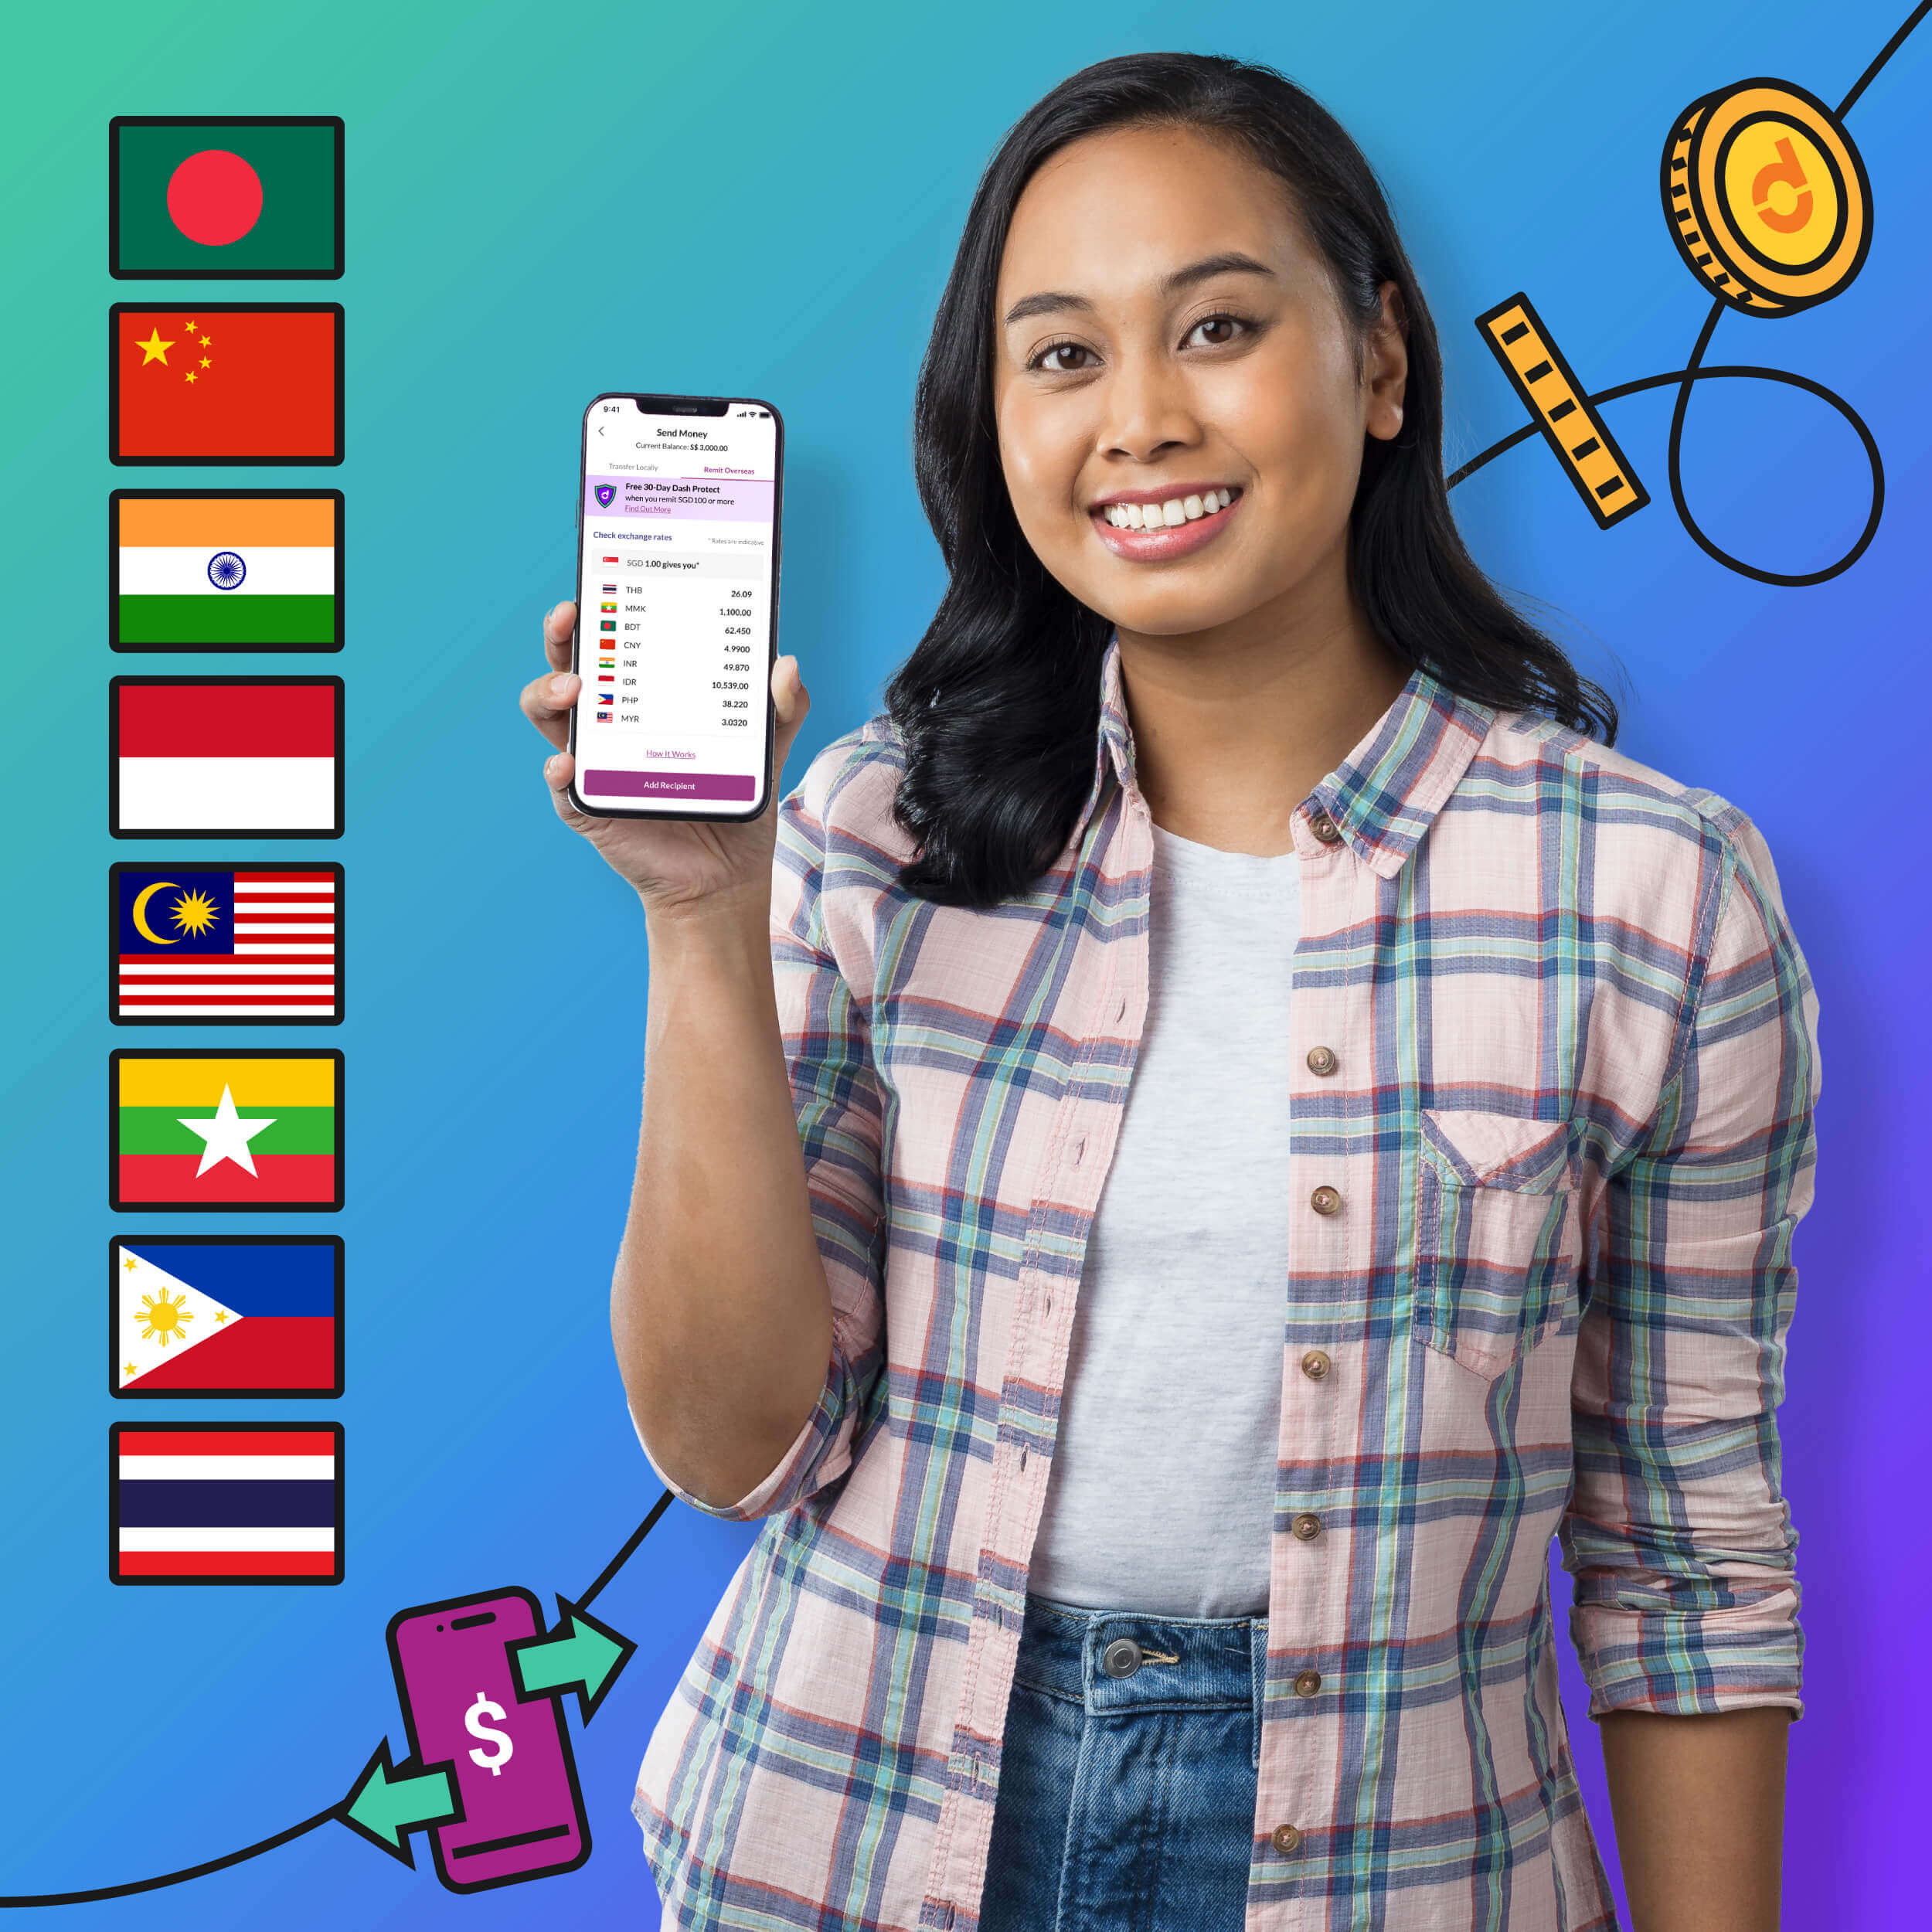 Make fast, easy, safe remittance with your phone